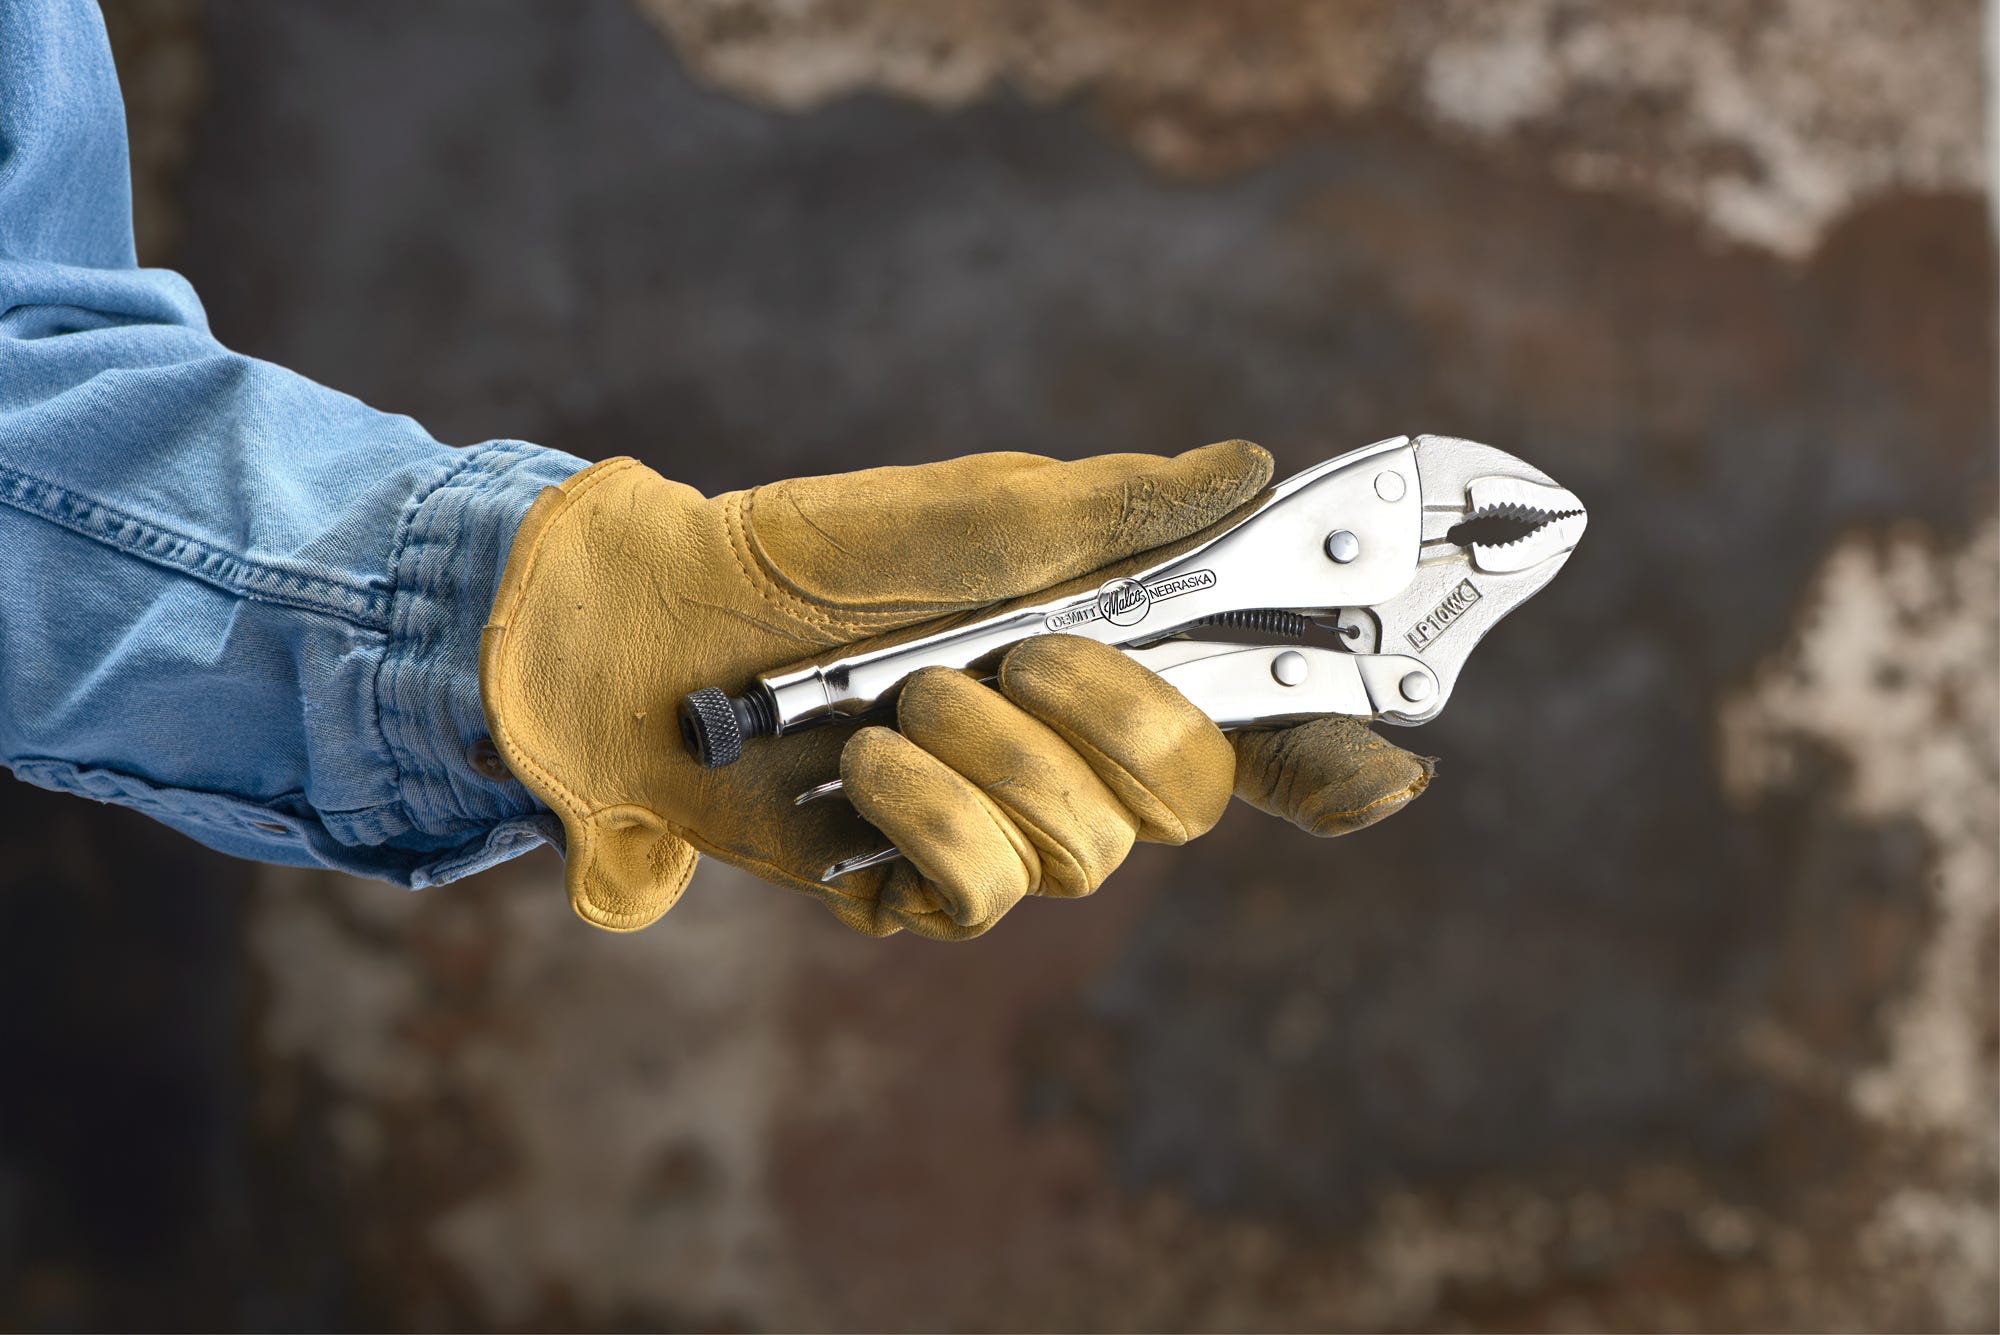 Why These American-made Locking Pliers Are Worth Three Times the Price